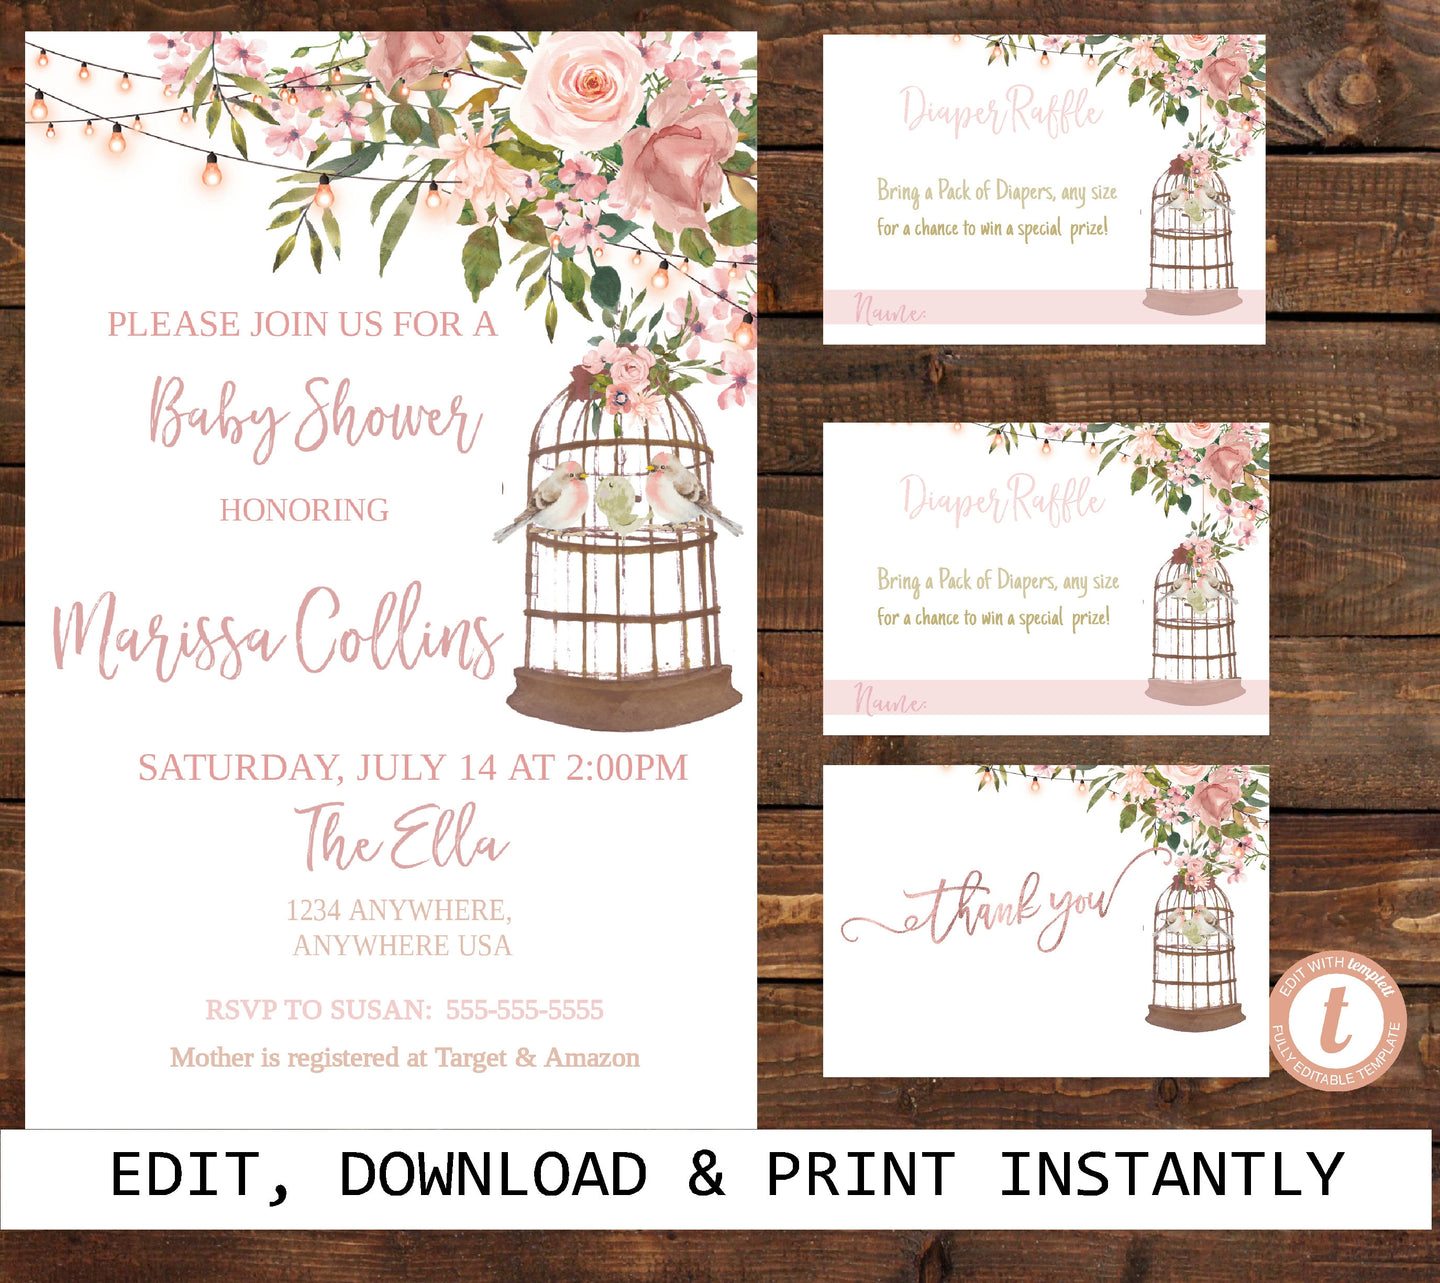 Bird Baby Shower Invite, Rustic Baby Shower, Diaper Raffle, Thank You card, books for Baby, Floral Baby, Printable Invitation Template